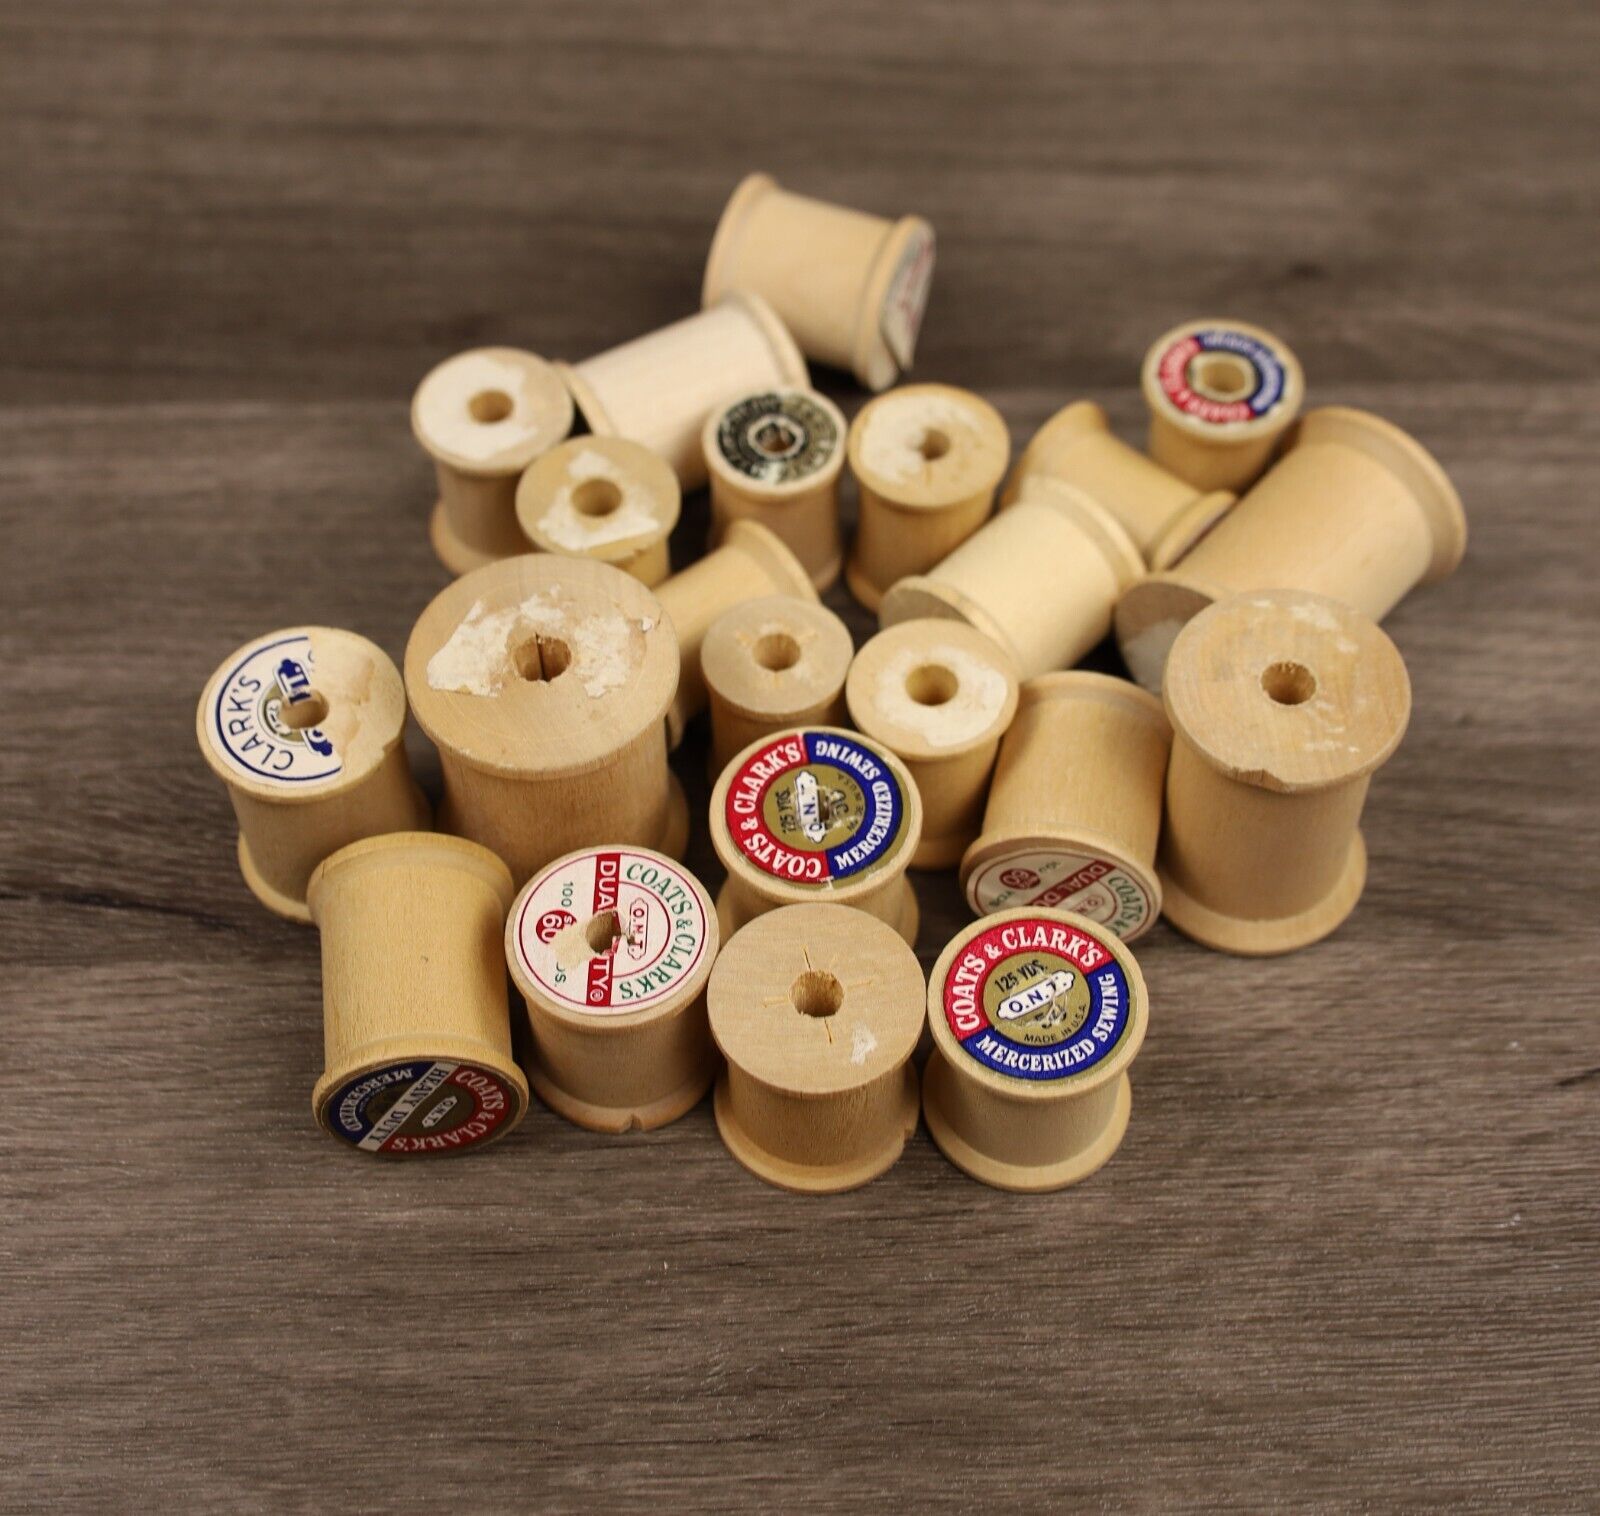 Lot of 23 Vintage assorted empty old sewing thread spools